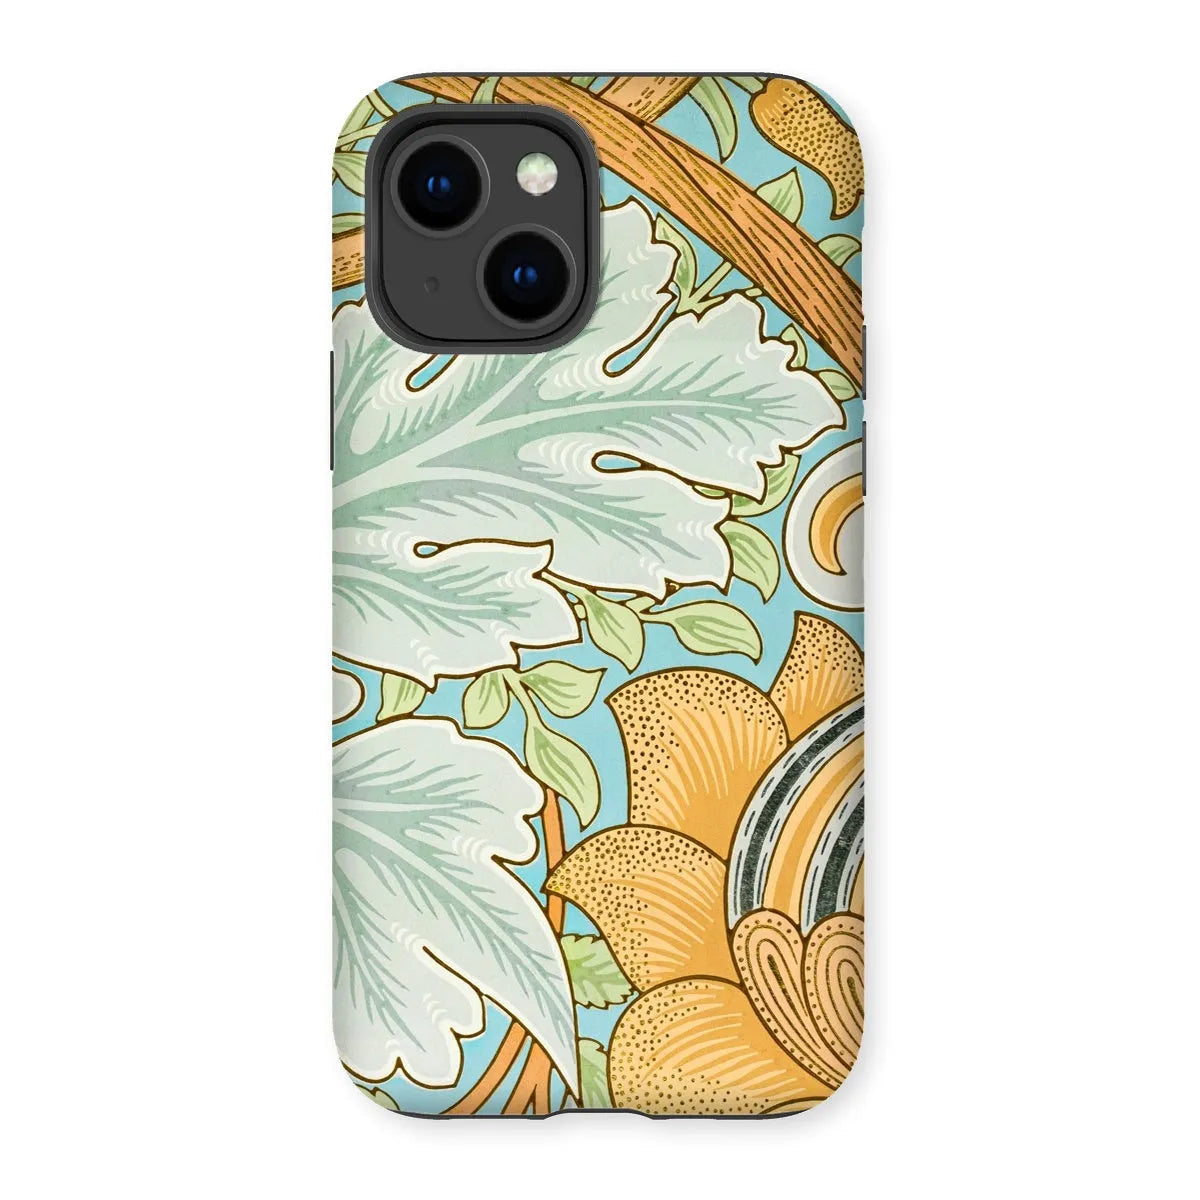 St. James - Arts And Crafts Phone Case - William Morris - Iphone 14 / Matte - Mobile Phone Cases - Aesthetic Art